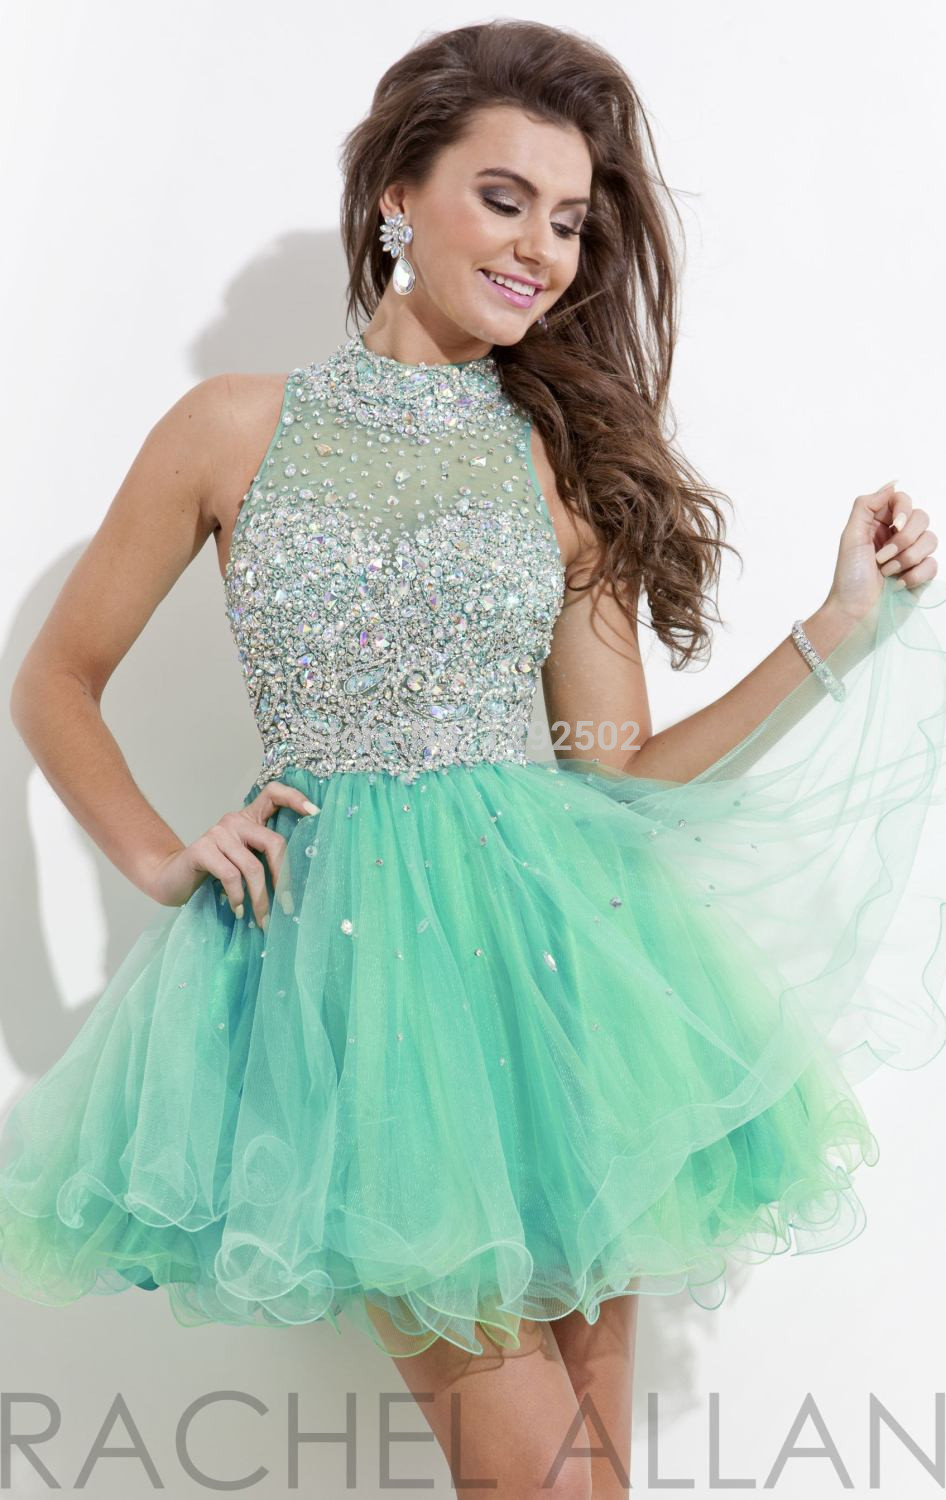 ... Crystal-Cocktail-Party-Short-Prom-Dresses-Homecoming-Dresses-Size.jpg